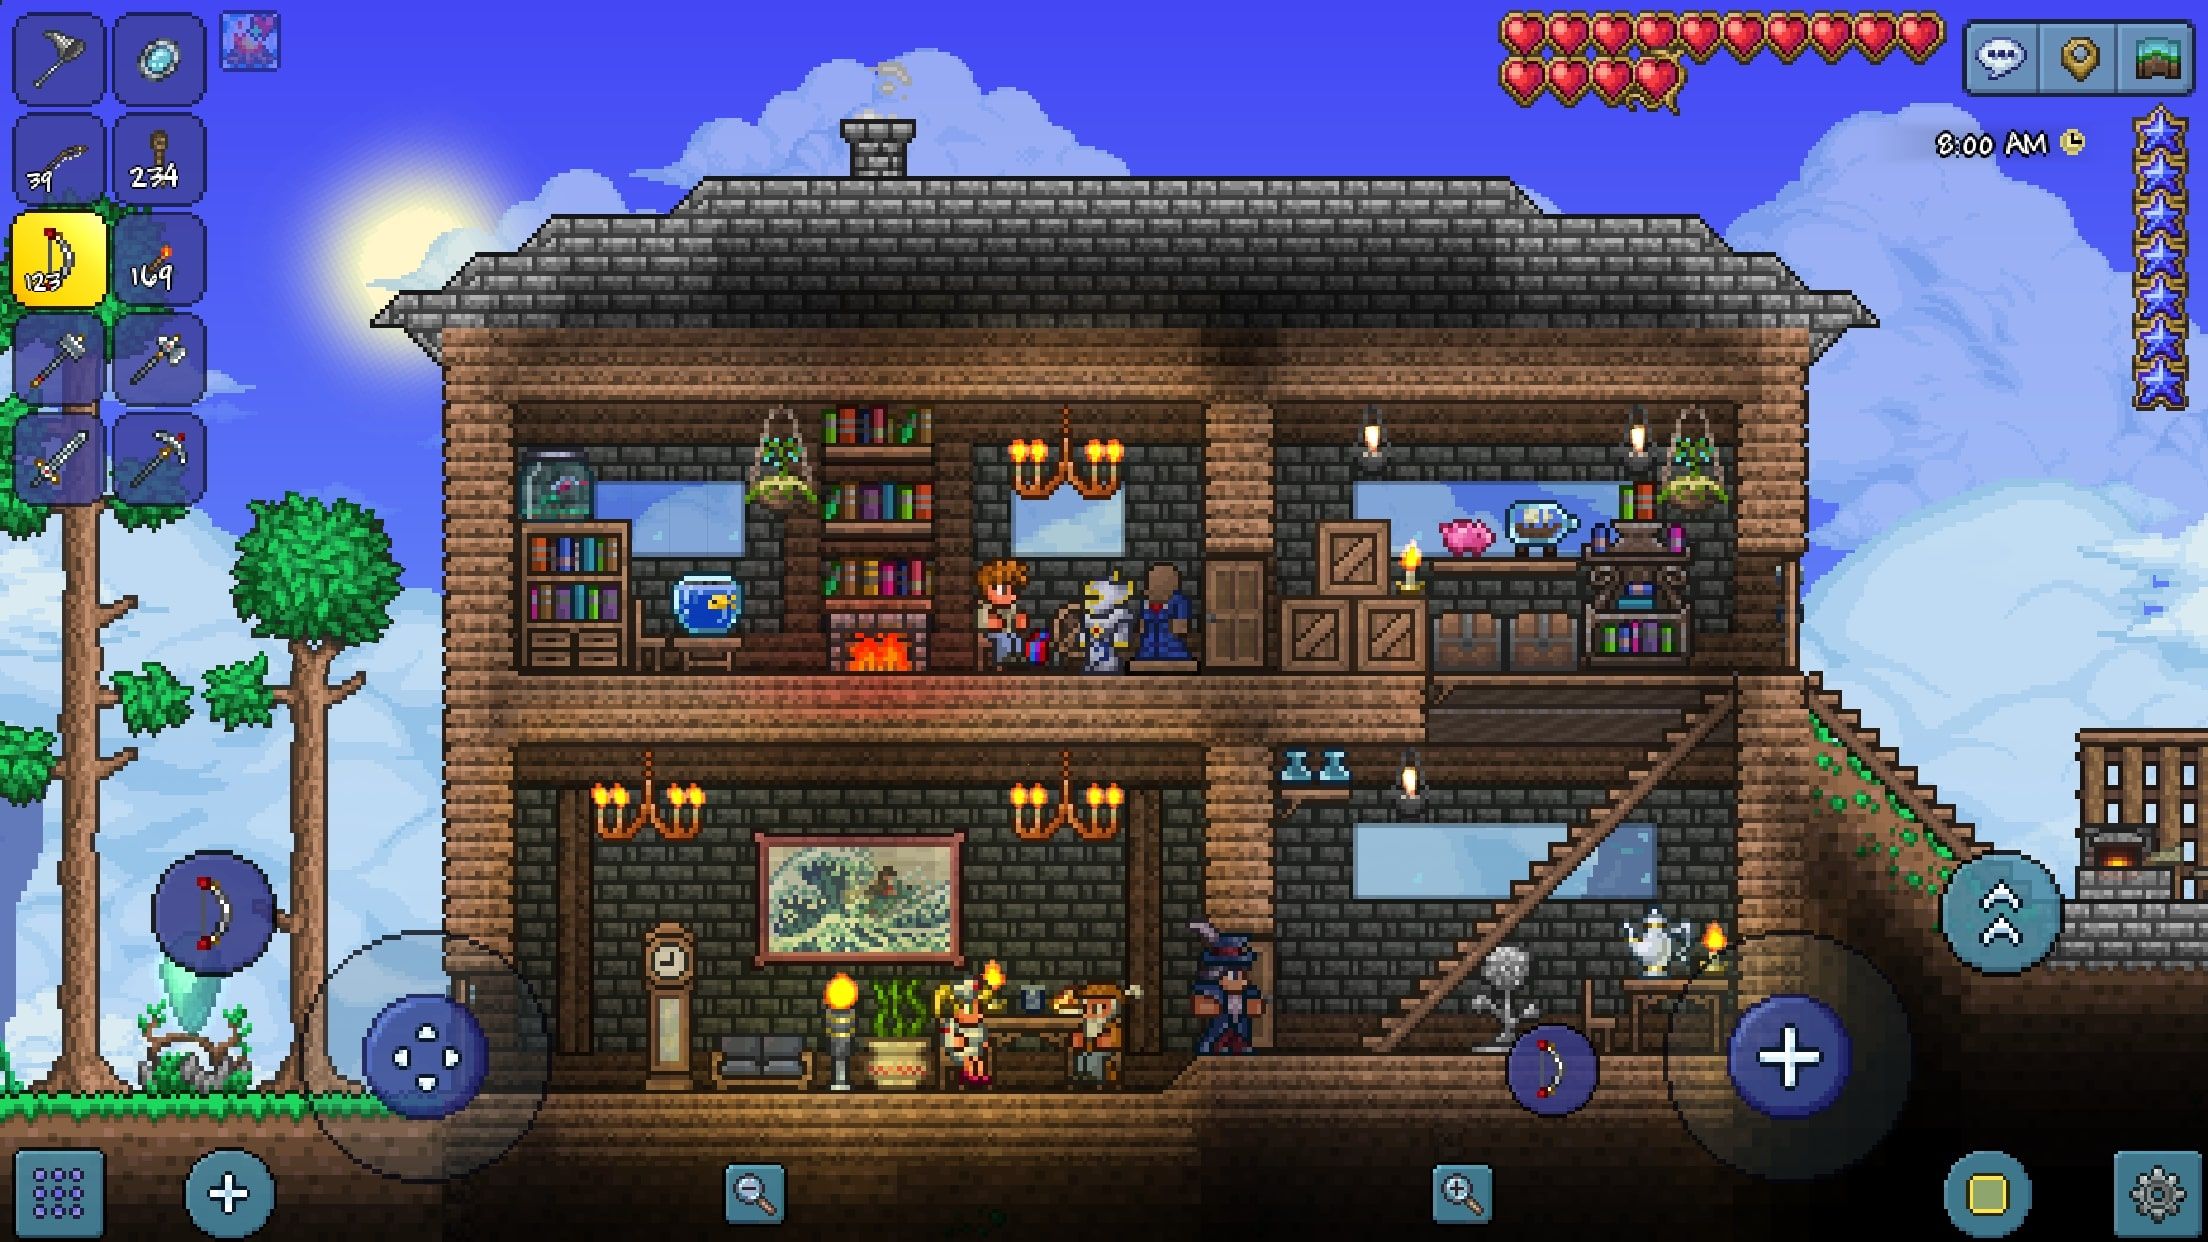 Terraria showing characters in a house from a 2D perspective